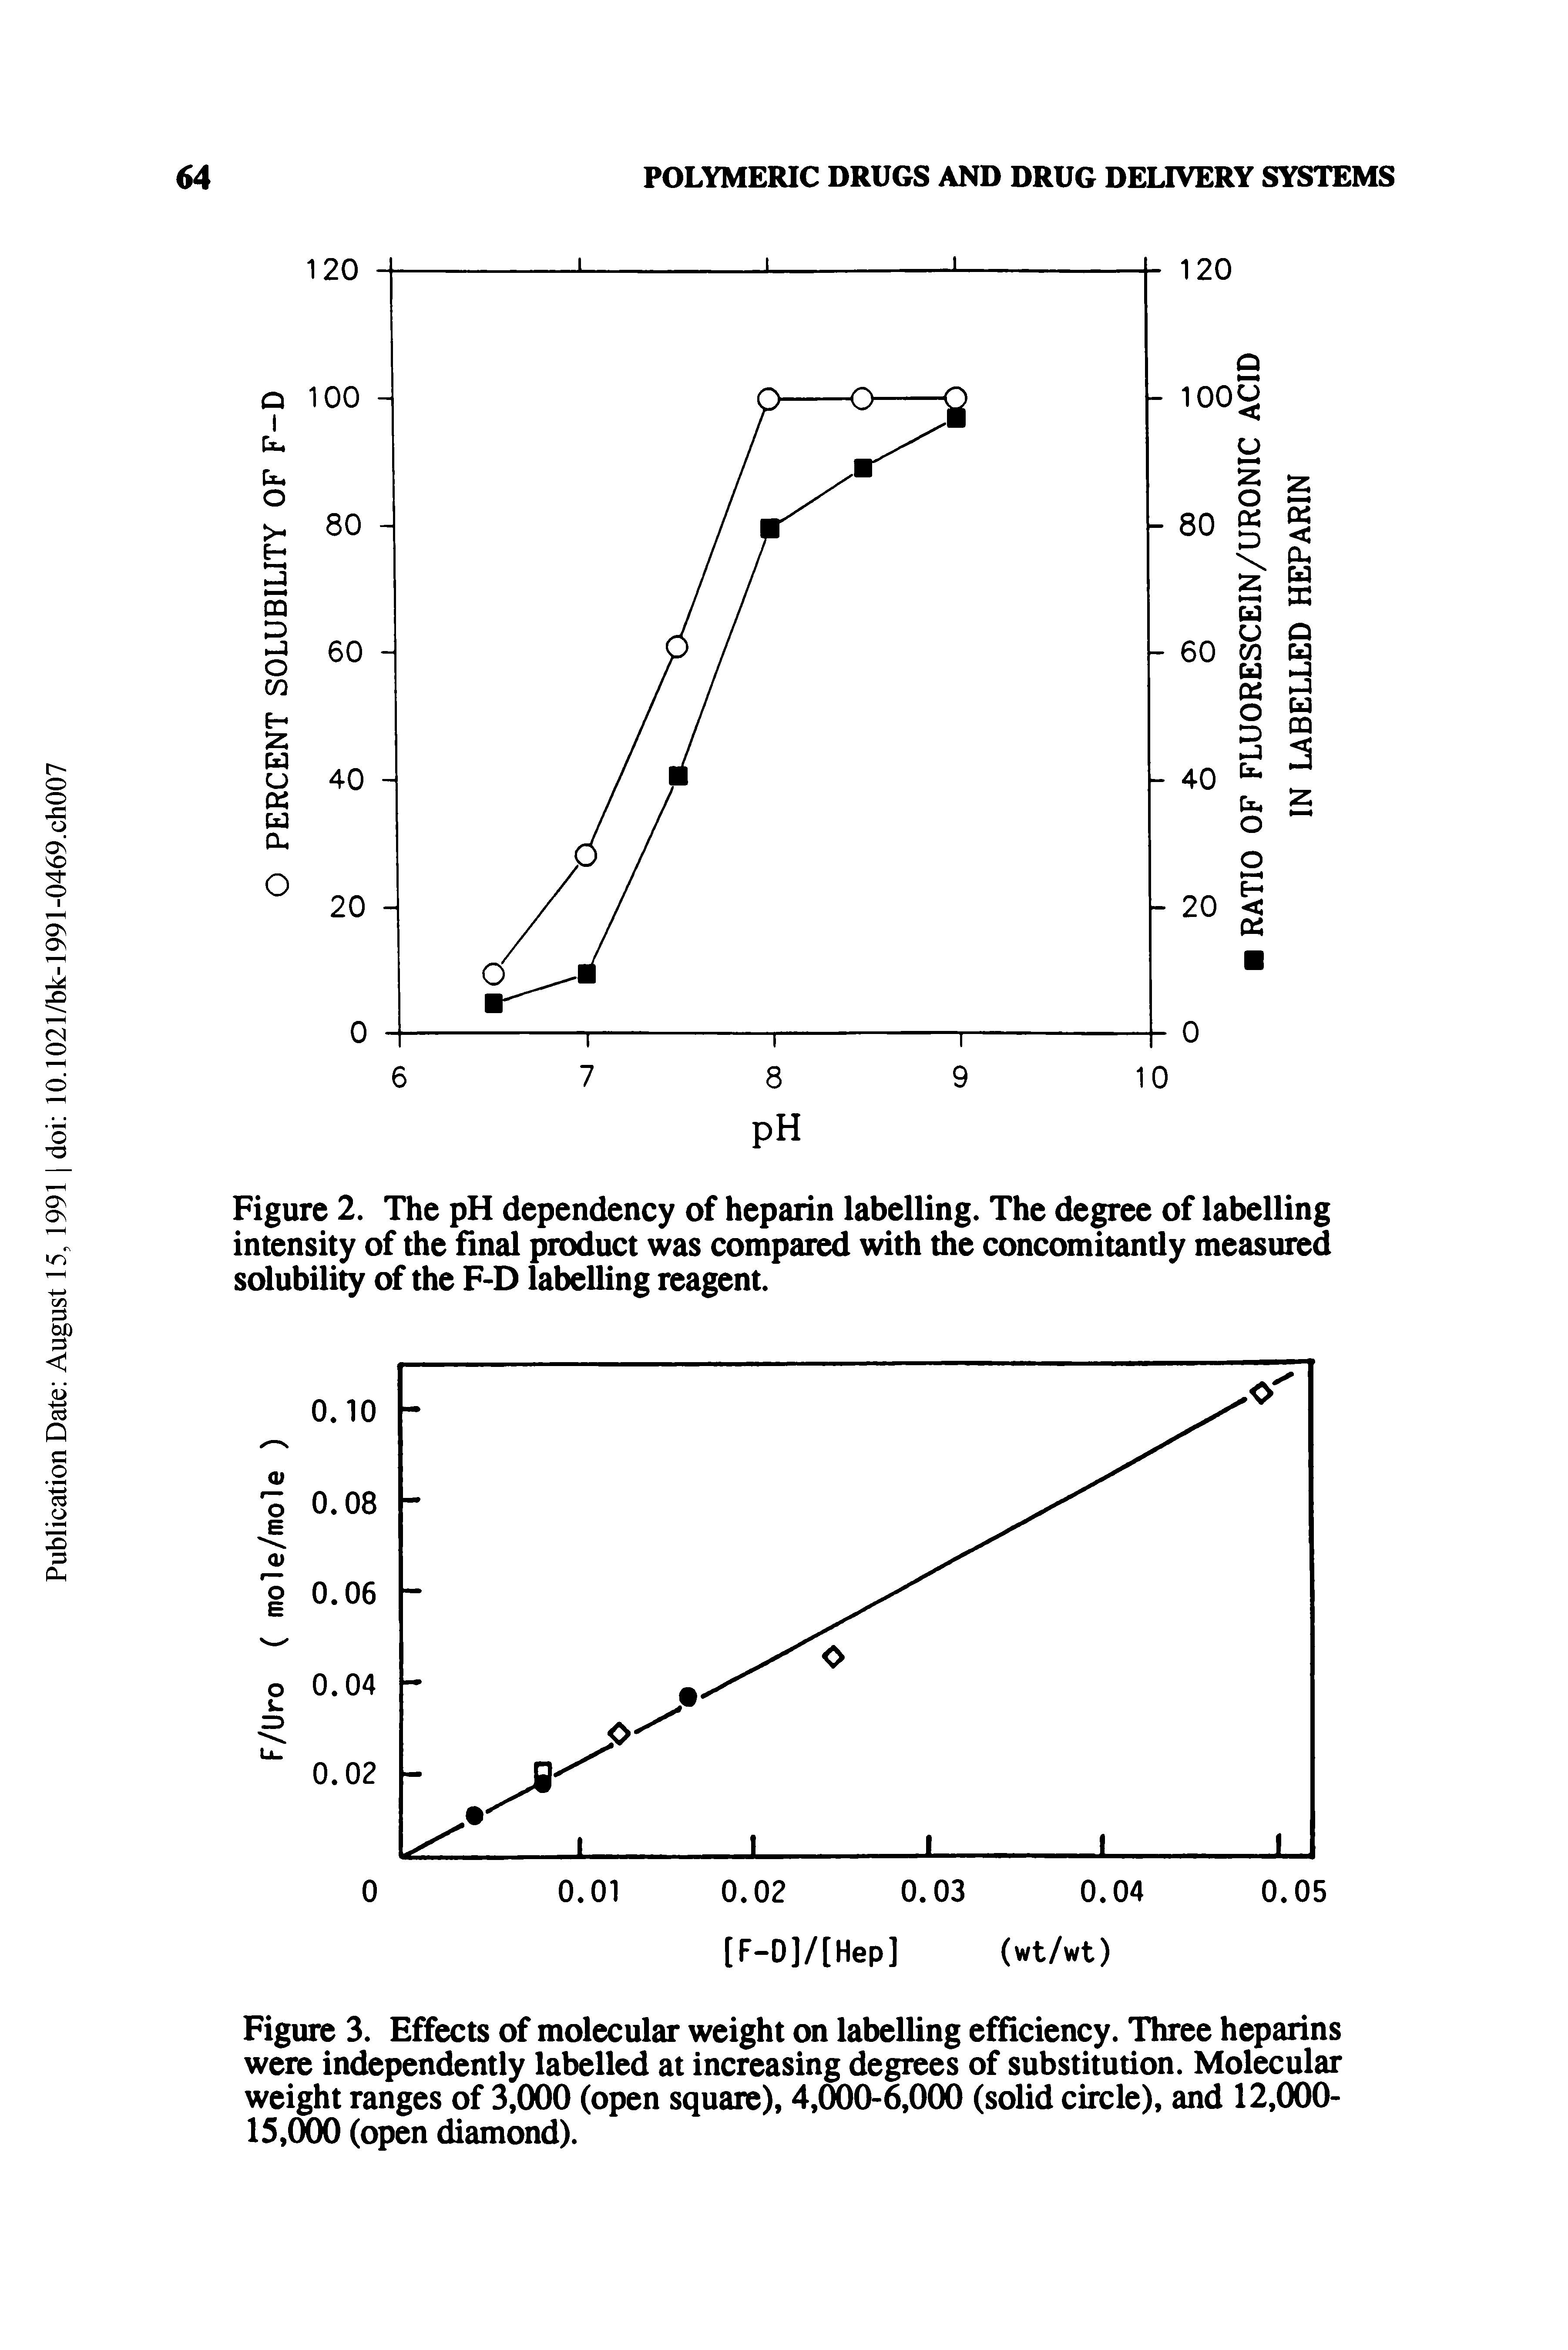 Figure 2. The pH dependency of heparin labelling. The degree of labelling intensity of the final product was compared with the concomitantly measured solubility of the F-D labelling reagent.